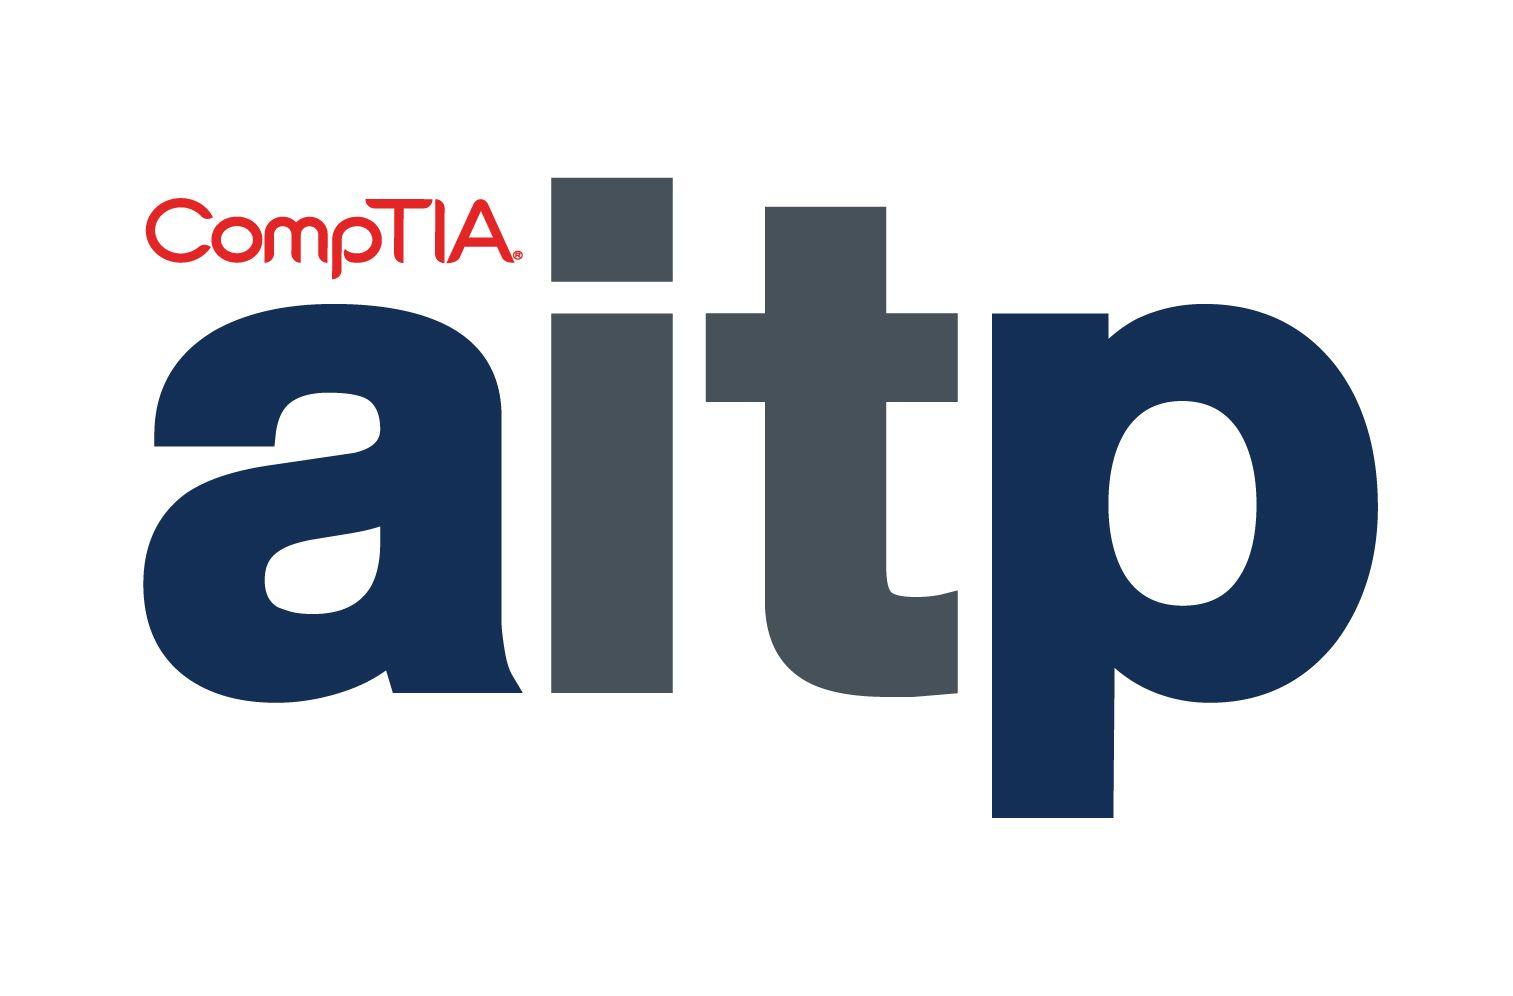 CompTIA Logo - About